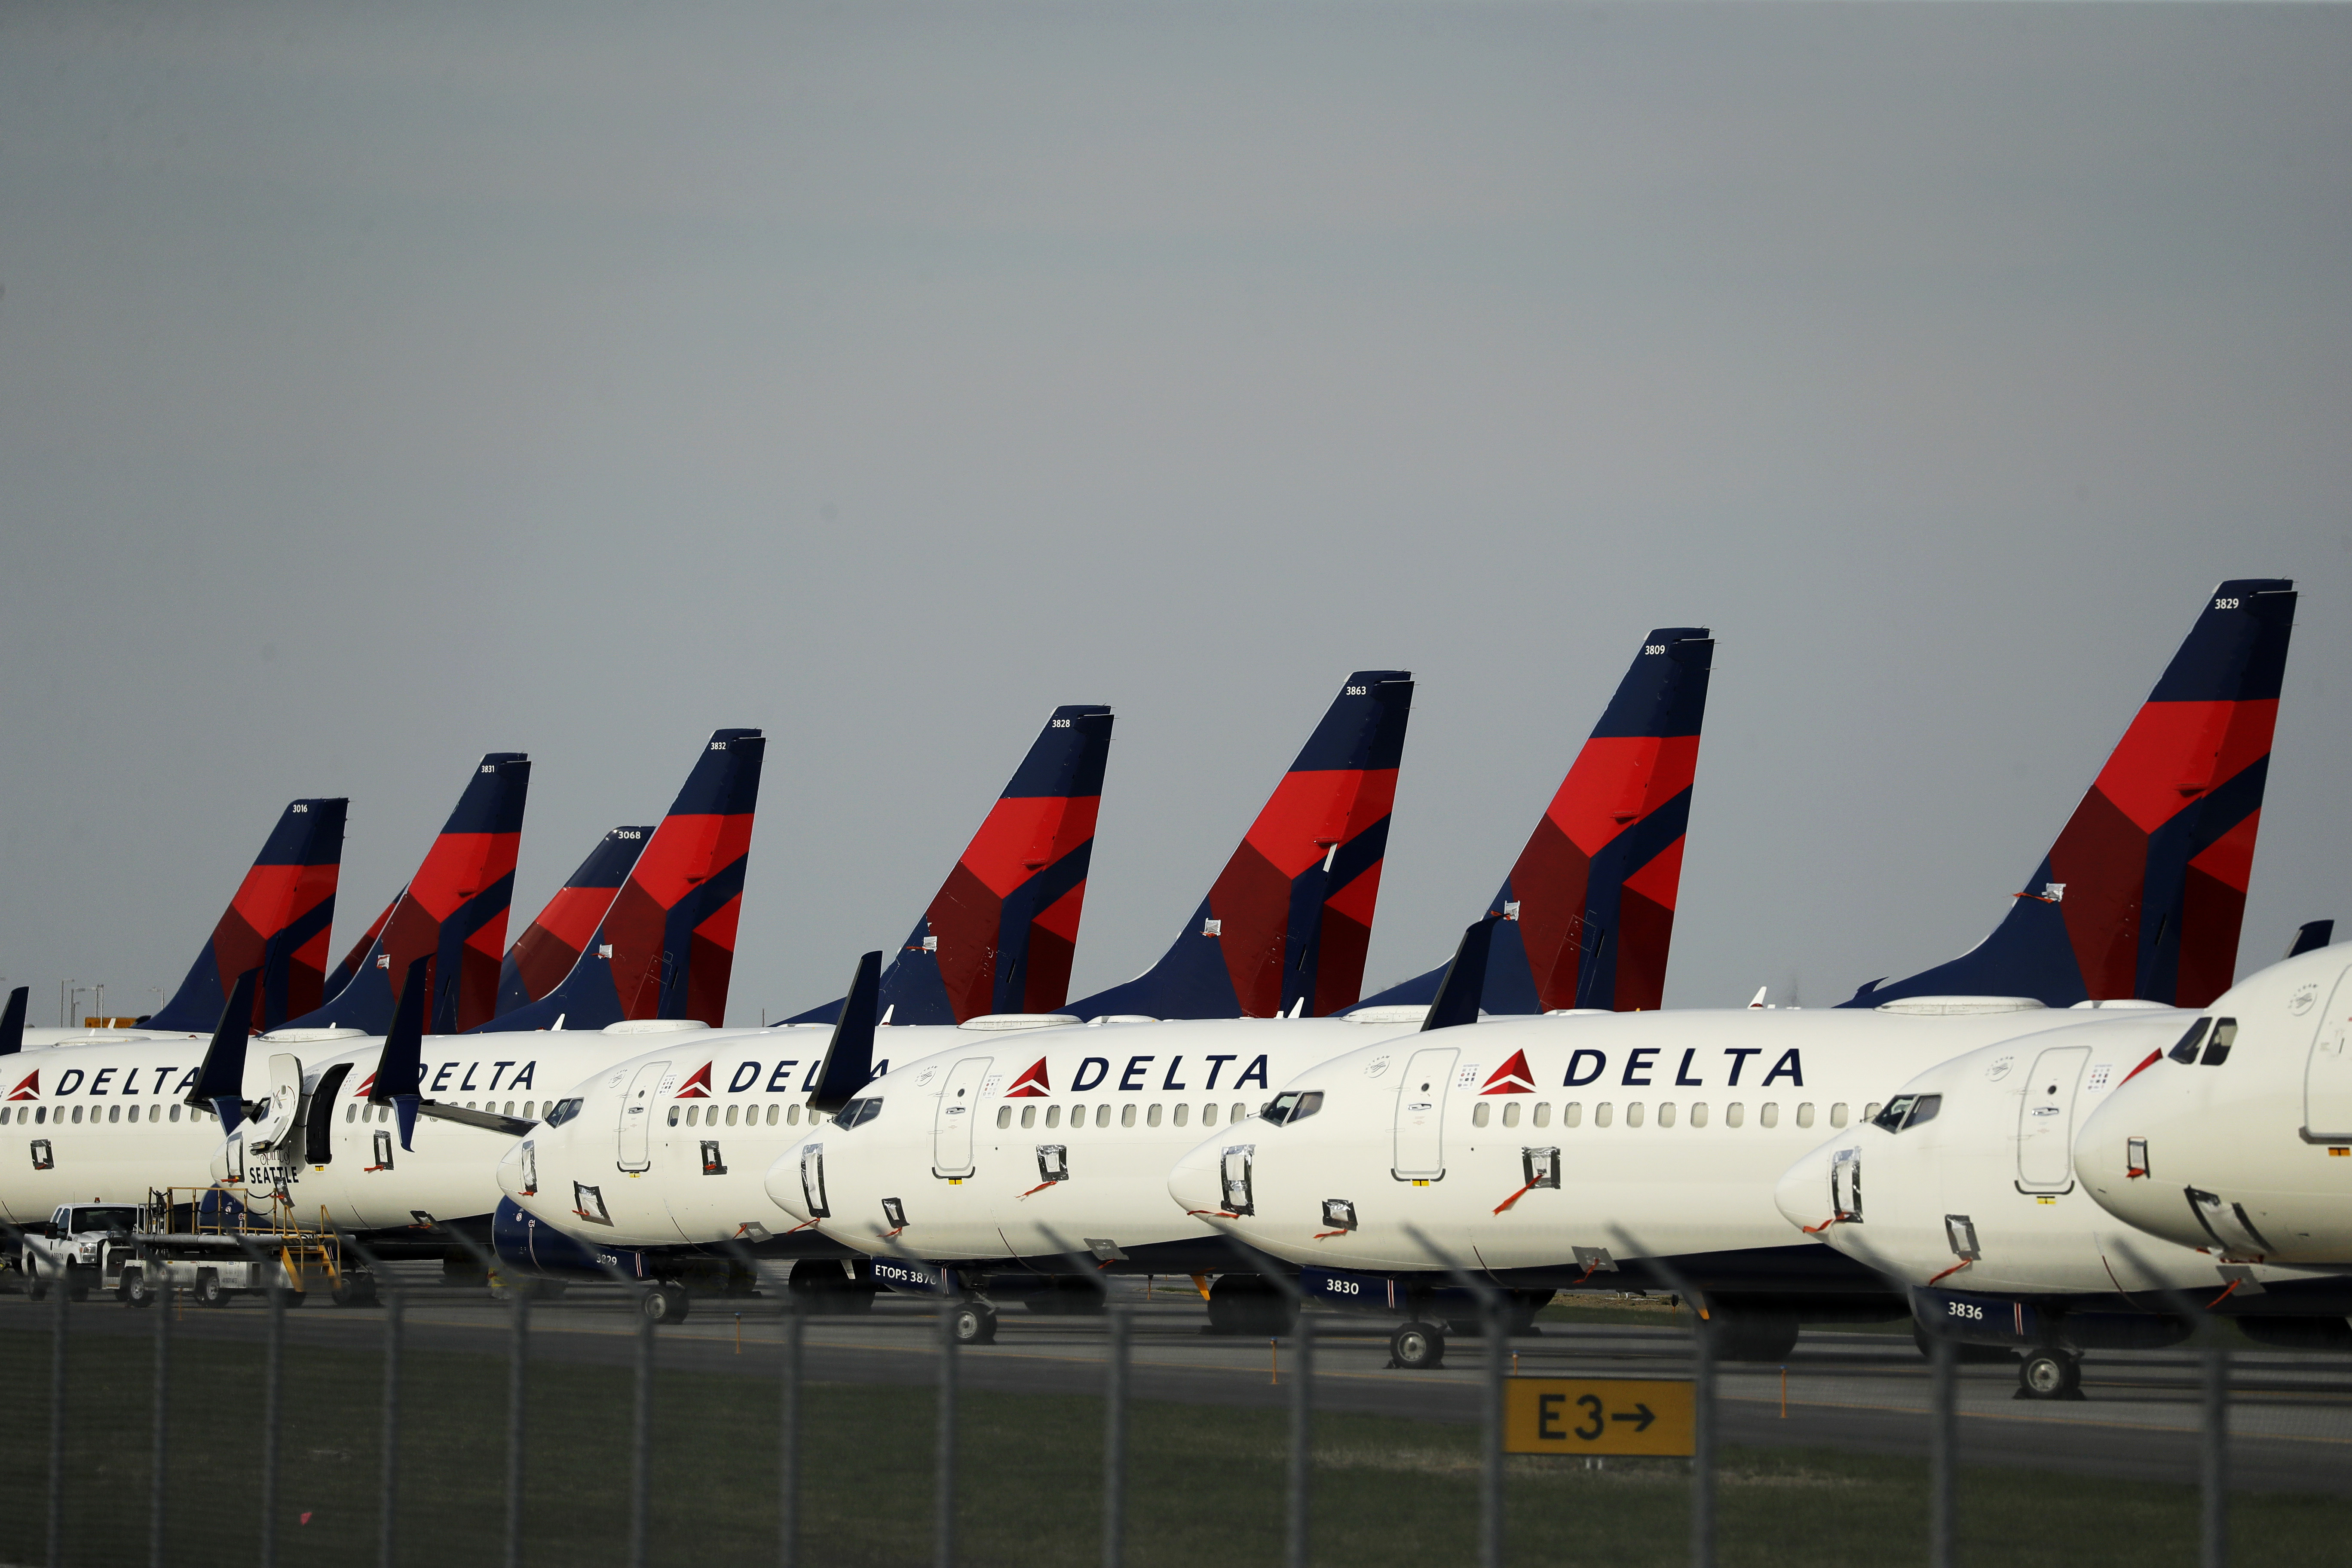 Several dozen mothballed Delta Air Lines jets are parked at Kansas City International Airport Wednesday, April 1, 2020 in Kansas City, Mo. The planes are among the thousands of passenger jets taken out of service worldwide as travel restrictions and stay-at-home orders due to the new coronavirus has drastically reduced air travel. (AP Photo/Charlie Riedel)